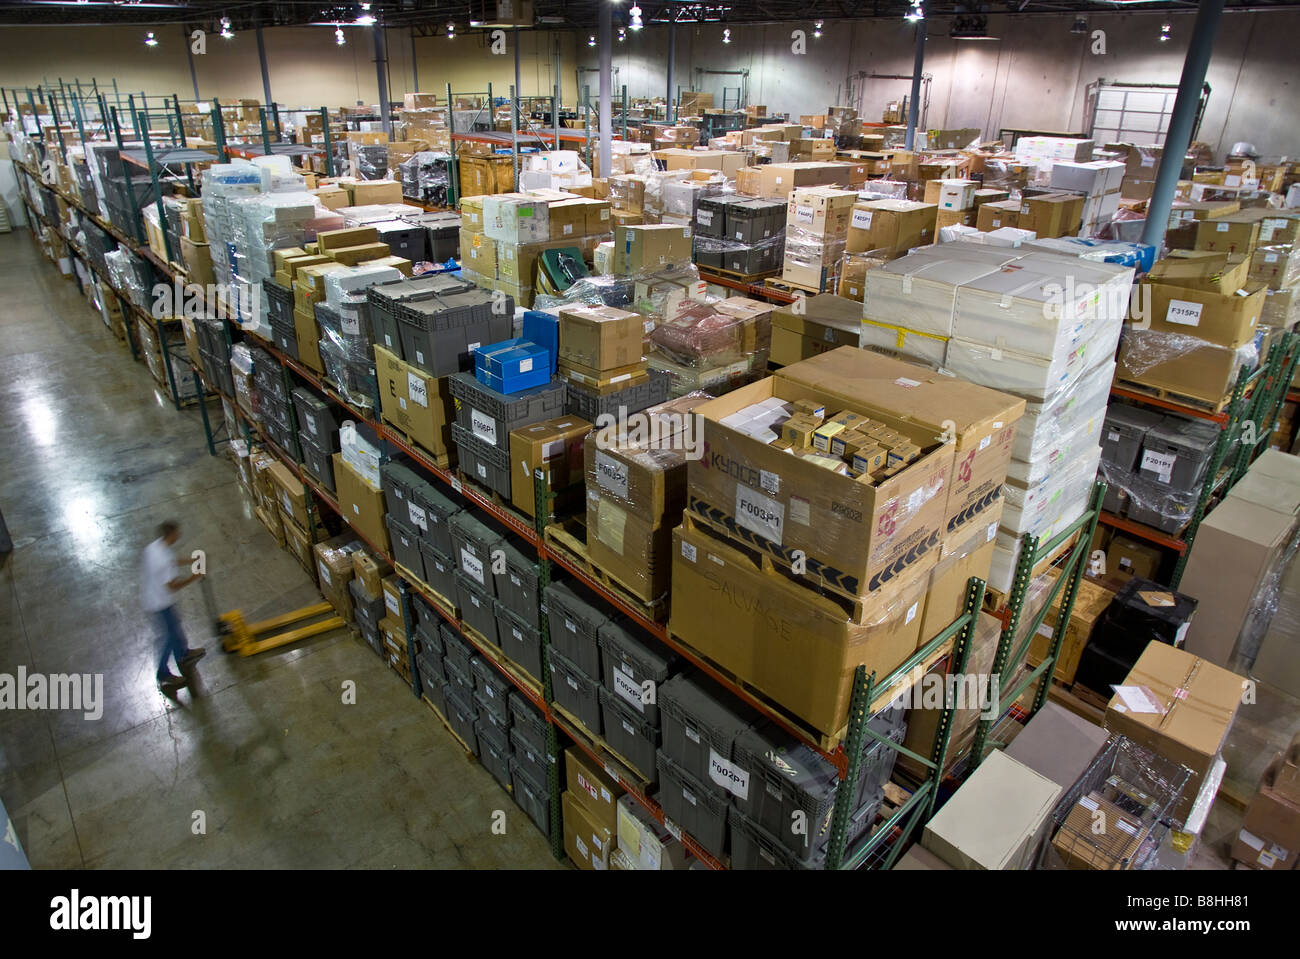 Warehouse full of inventory seen from above with worker using forklift. Stock Photo